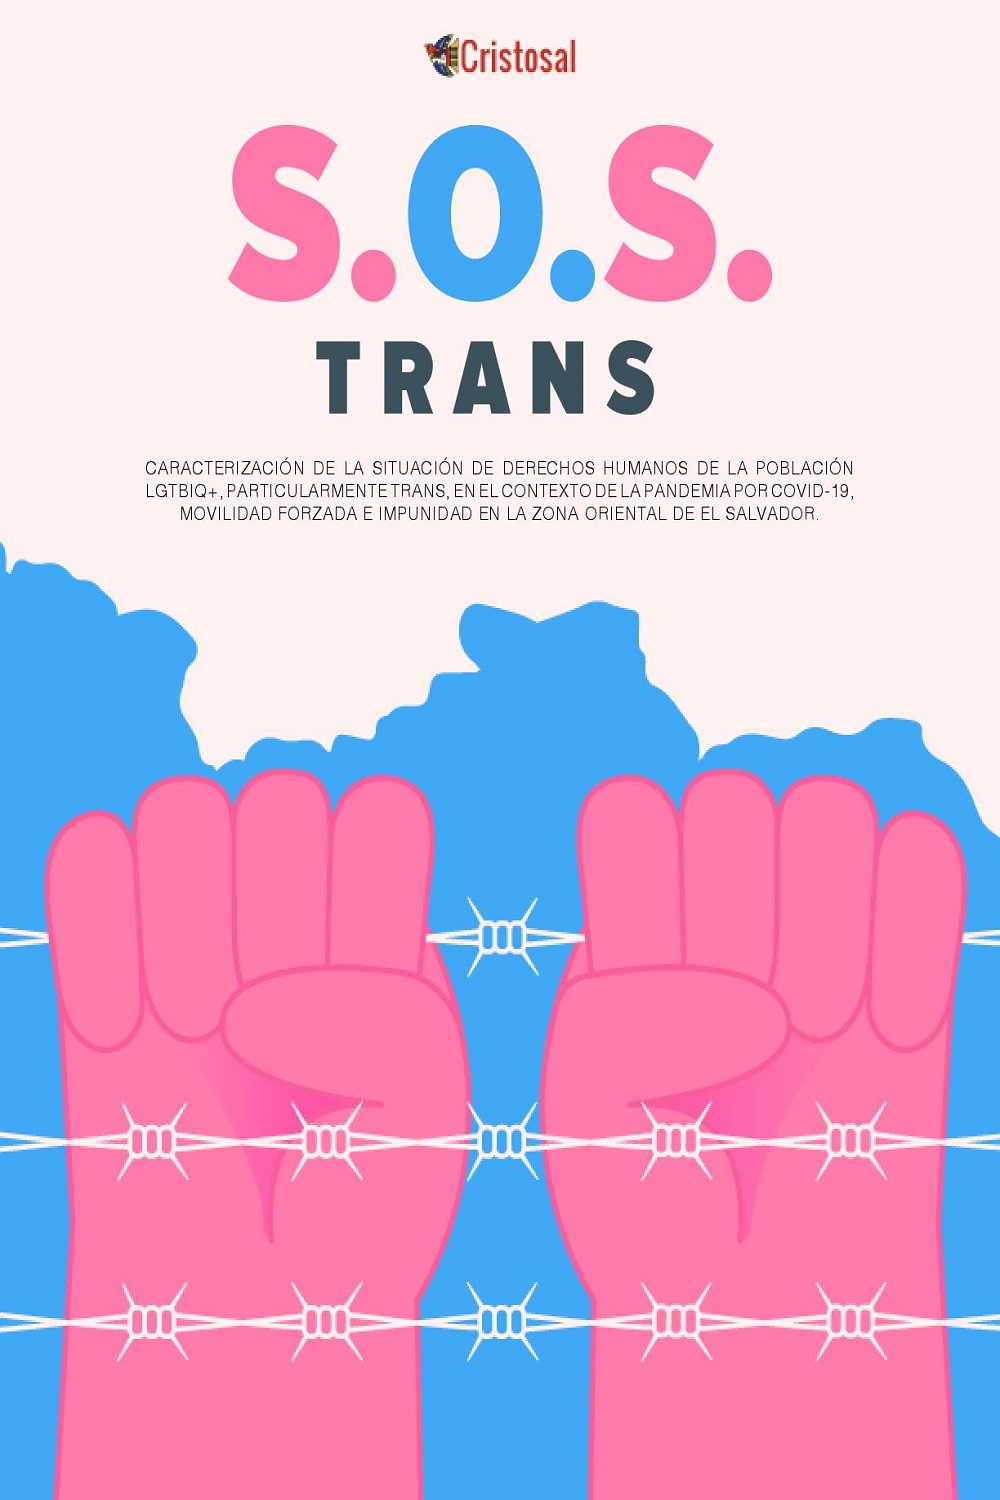 S.O.S. TRANS – Characterization of the human rights situation of the LGBTIQ+ population (Spanish)